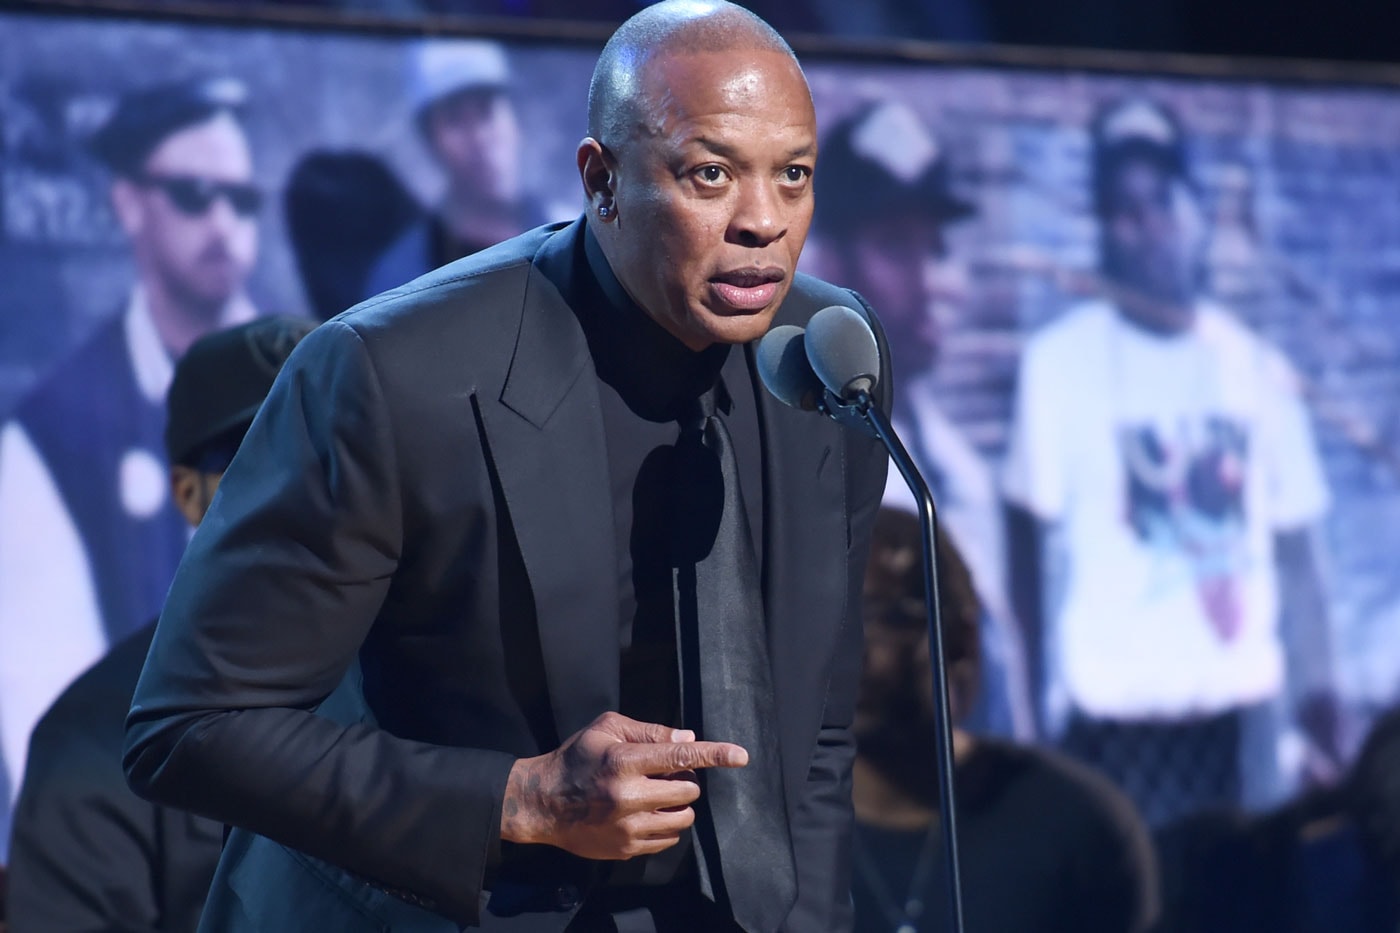 Here's a Snippet From Dr. Dre's New Album